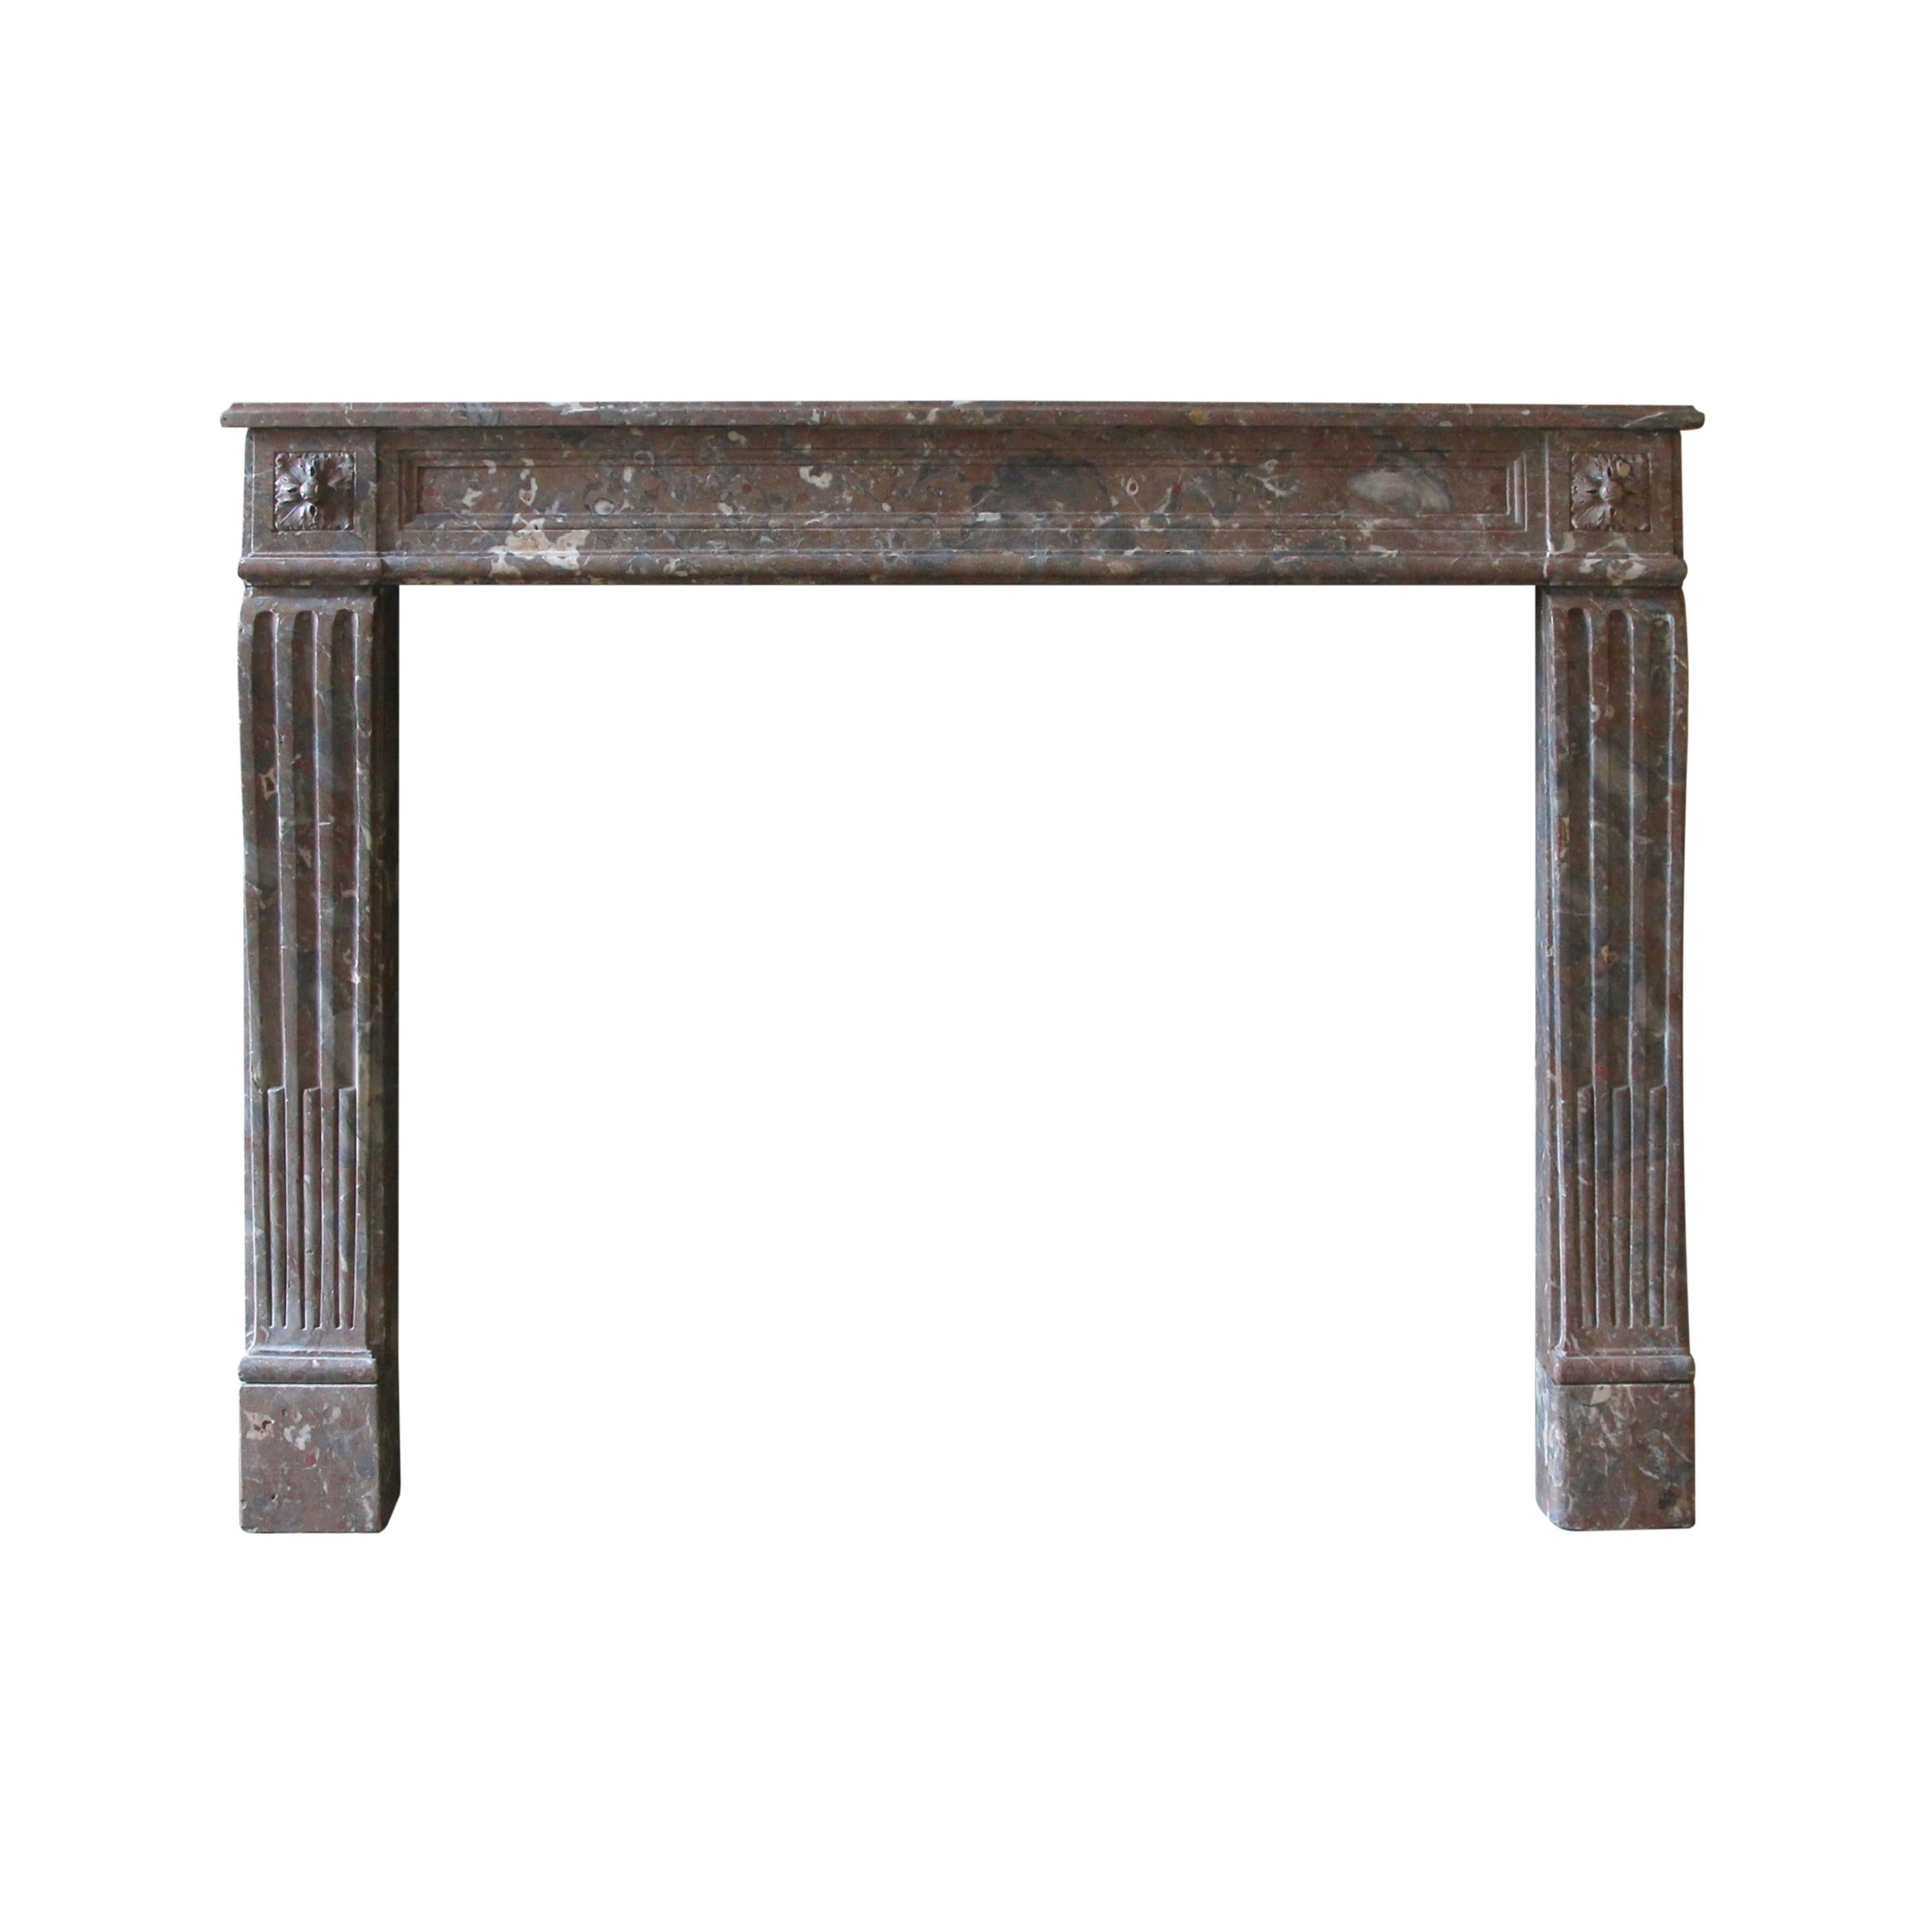 Crafted during the 19th Century in the style of Louis XVI French Regency, this marble mantel showcases a unique blend of brown, gray, and white veined marble. Its design features subtle yet timeless floral motifs, while fluted carvings grace the